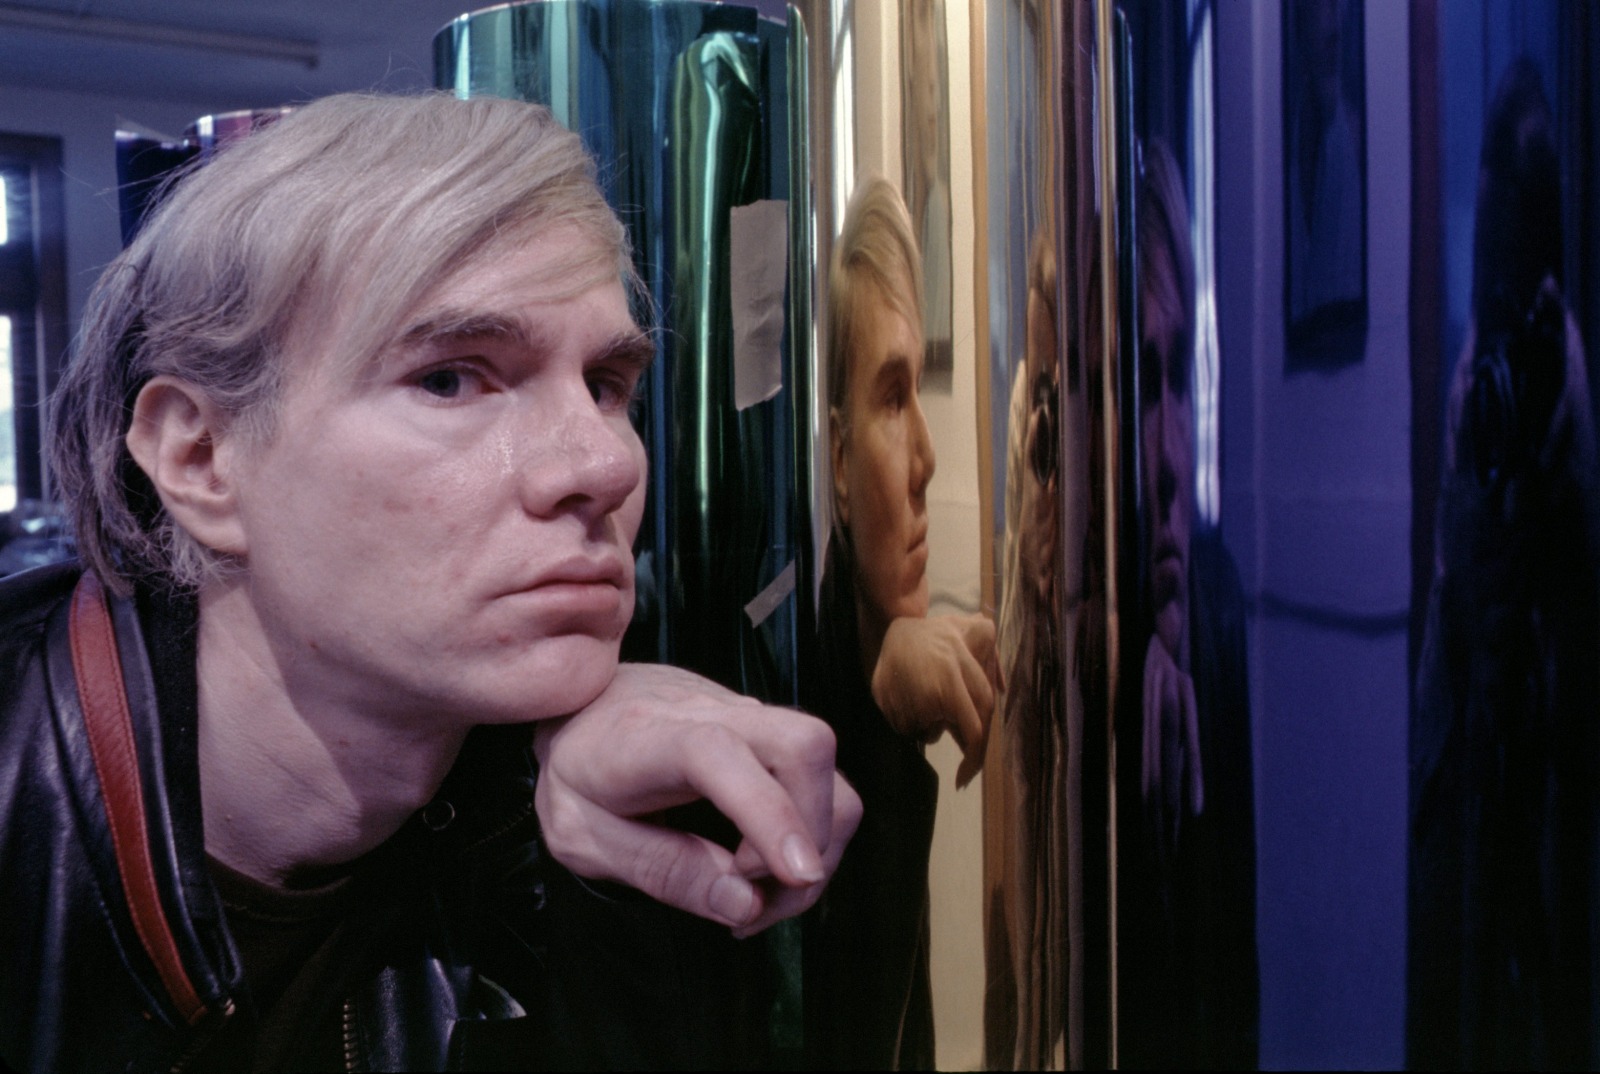 Andy Warhol at The Factory Union Square